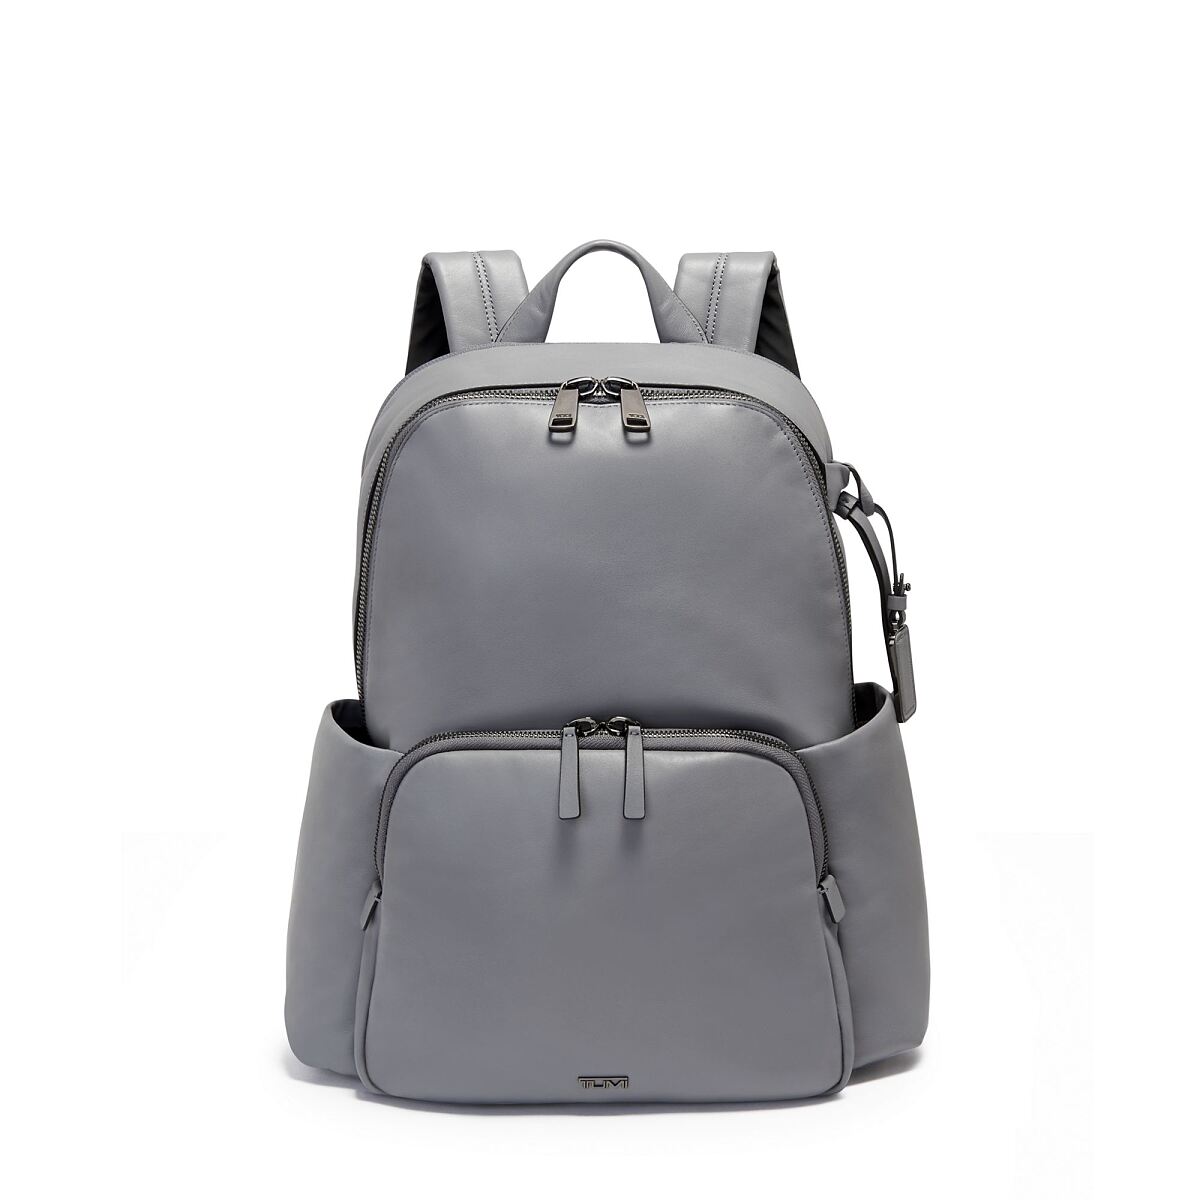 TUMI_Voyageur Leather_Ruby Backpack_Color Pearl Grey_€575